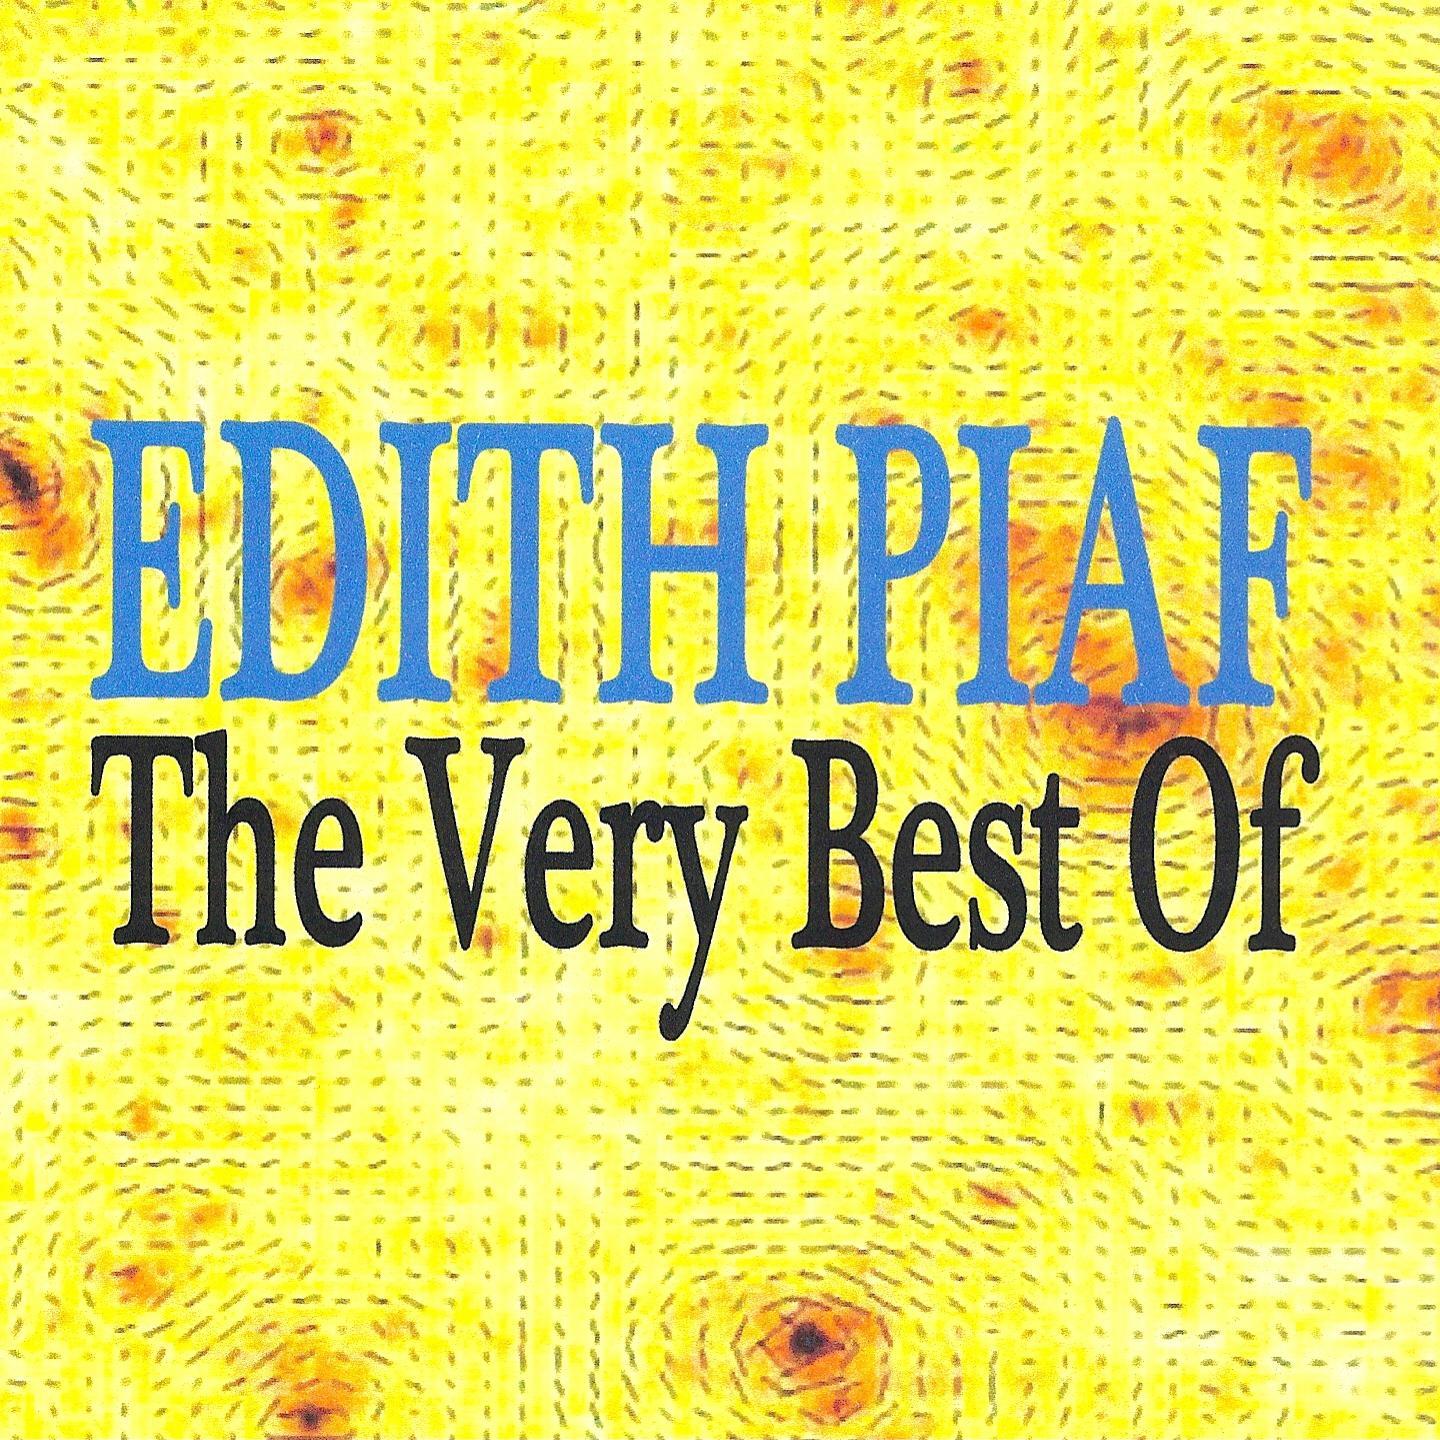 The Very Best Of Edith Piaf